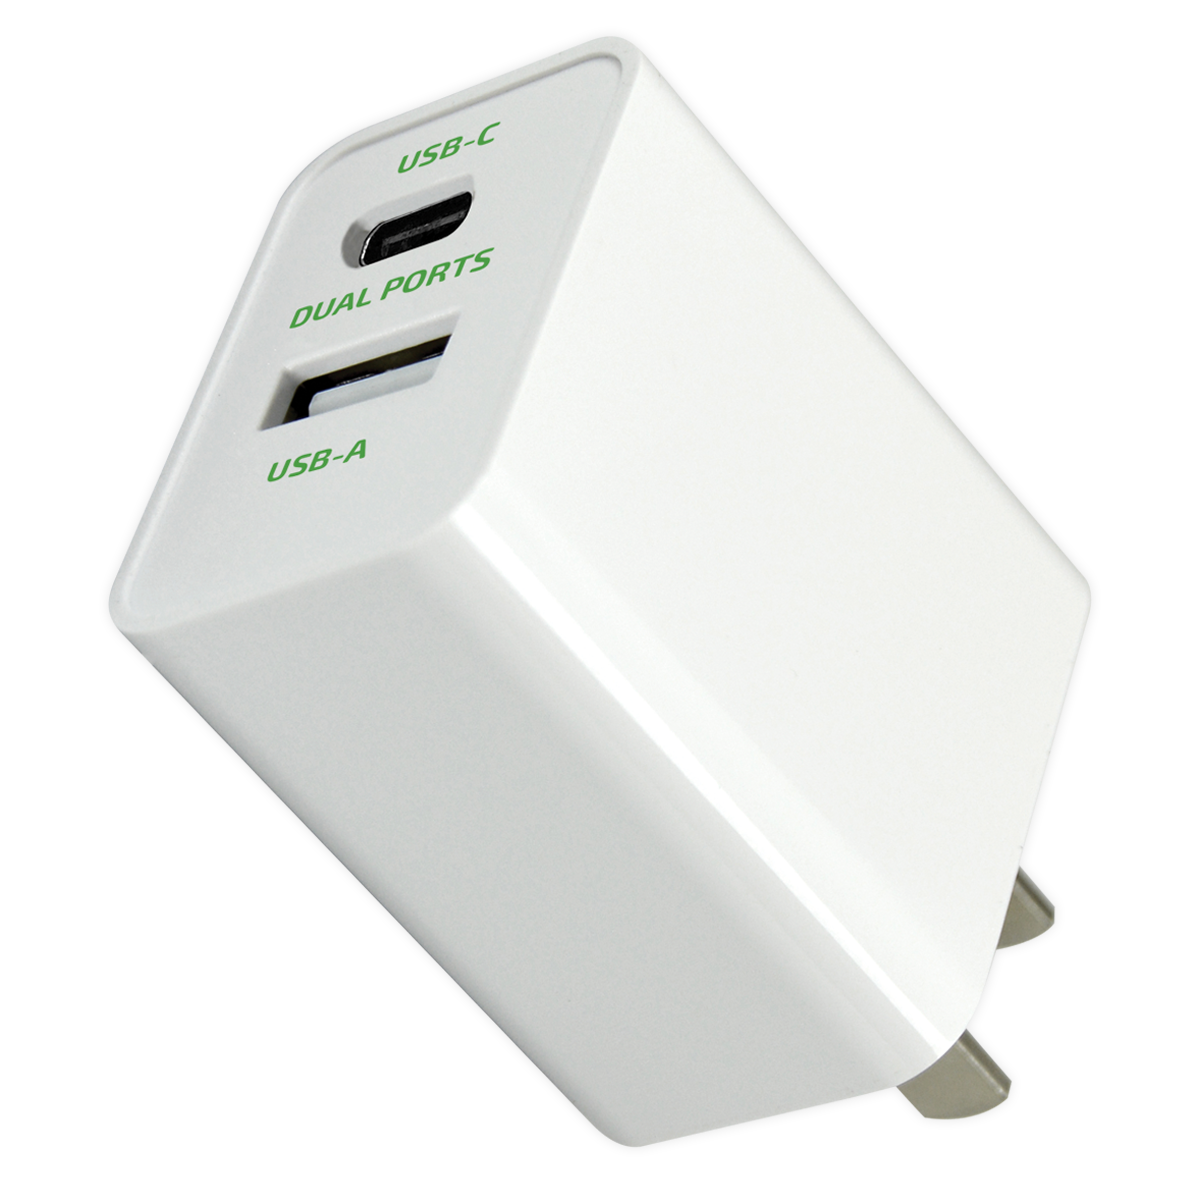 WHOLESALE 20W USB-A AND USB-C DUAL PORT USB-C-TO-USB-C AC WALL CHARGER SET 3 PIECES PER PACK 24628